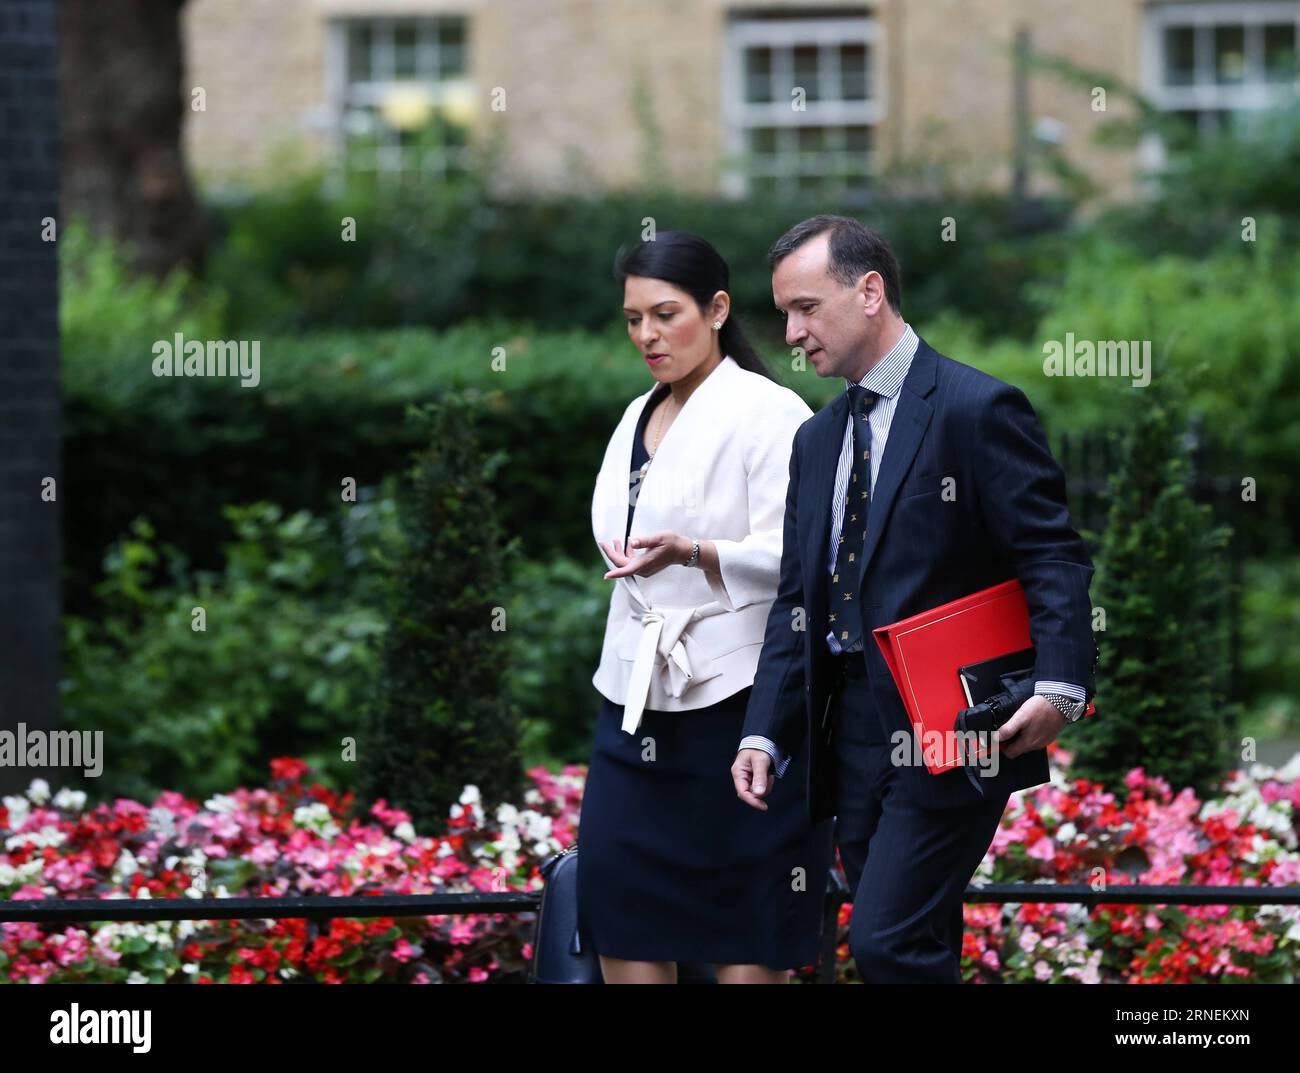 (160627) -- LONDON, June 27, 2016 -- Priti Patel (L), Minister of State for Employment, and Alun Cairns, Secretary of State for Wales, arrive for a cabinet meeting at 10 Downing Street in London, Britain, June 27, 2016. British Prime Minister David Cameron chaired an emergency cabinet meeting on Monday morning, after Britain had voted to leave the European Union. ) (zjy) BRITAIN-LONDON-BREXIT-CABINET MEETING HanxYan PUBLICATIONxNOTxINxCHN   160627 London June 27 2016 Priti Patel l Ministers of State for Employment and Alun Cairns Secretary of State for Wales Arrive for a Cabinet Meeting AT 10 Stock Photo